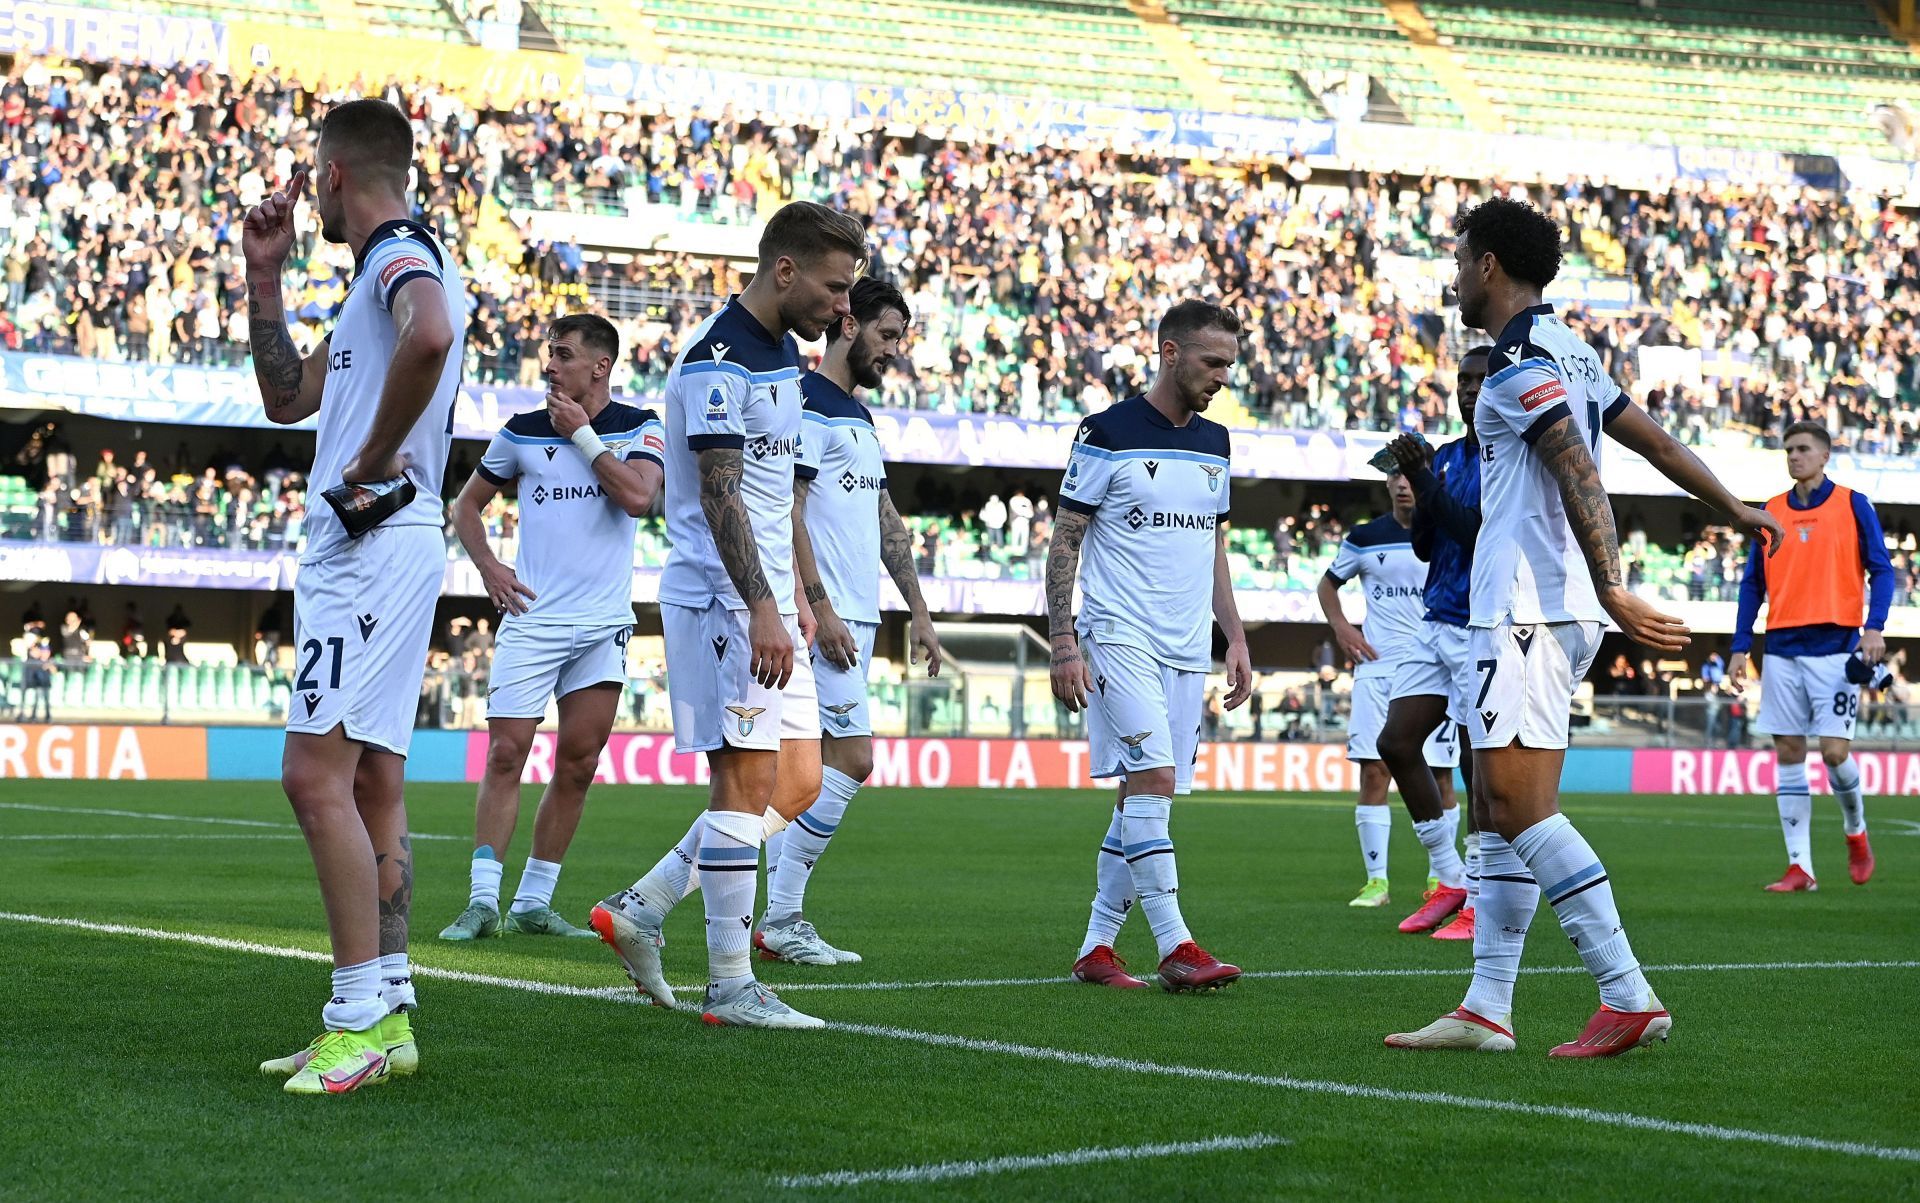 Lazio are looking to bounce back from their loss last time out